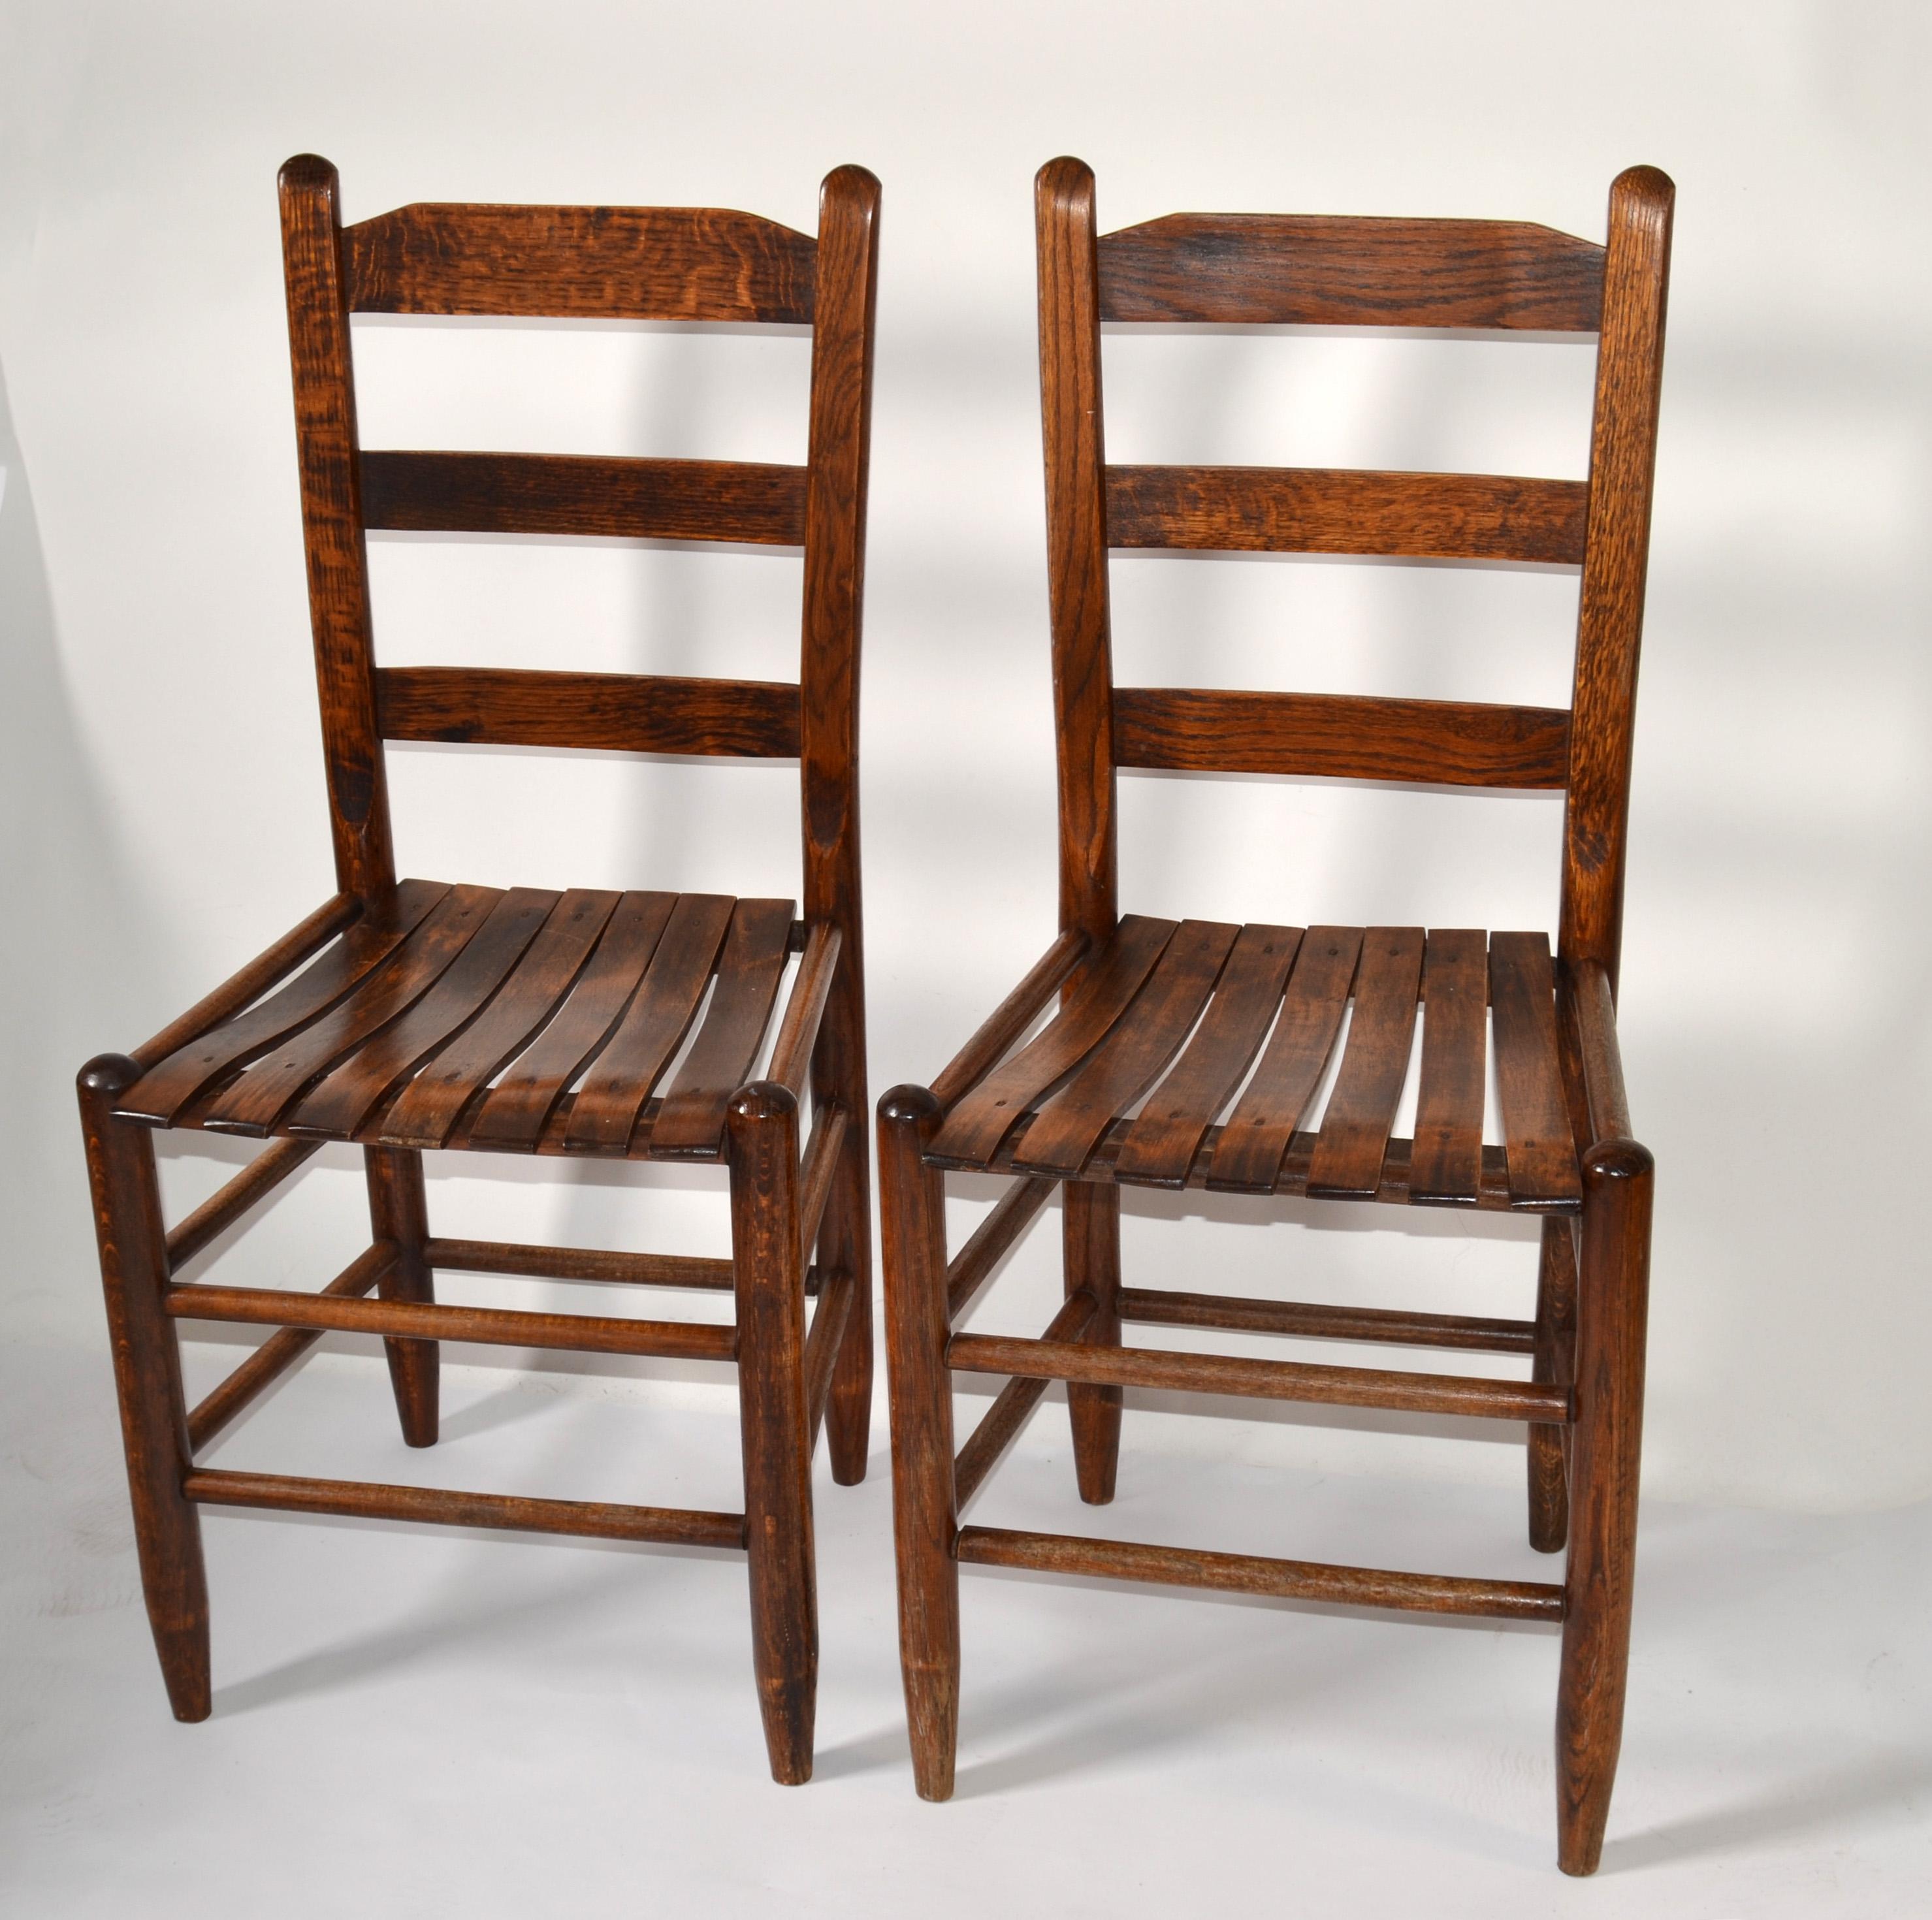 Hand-Crafted Pair Mid-20th Century Handmade Solid Oak Ladder Back Side Bistro Dining Chairs For Sale